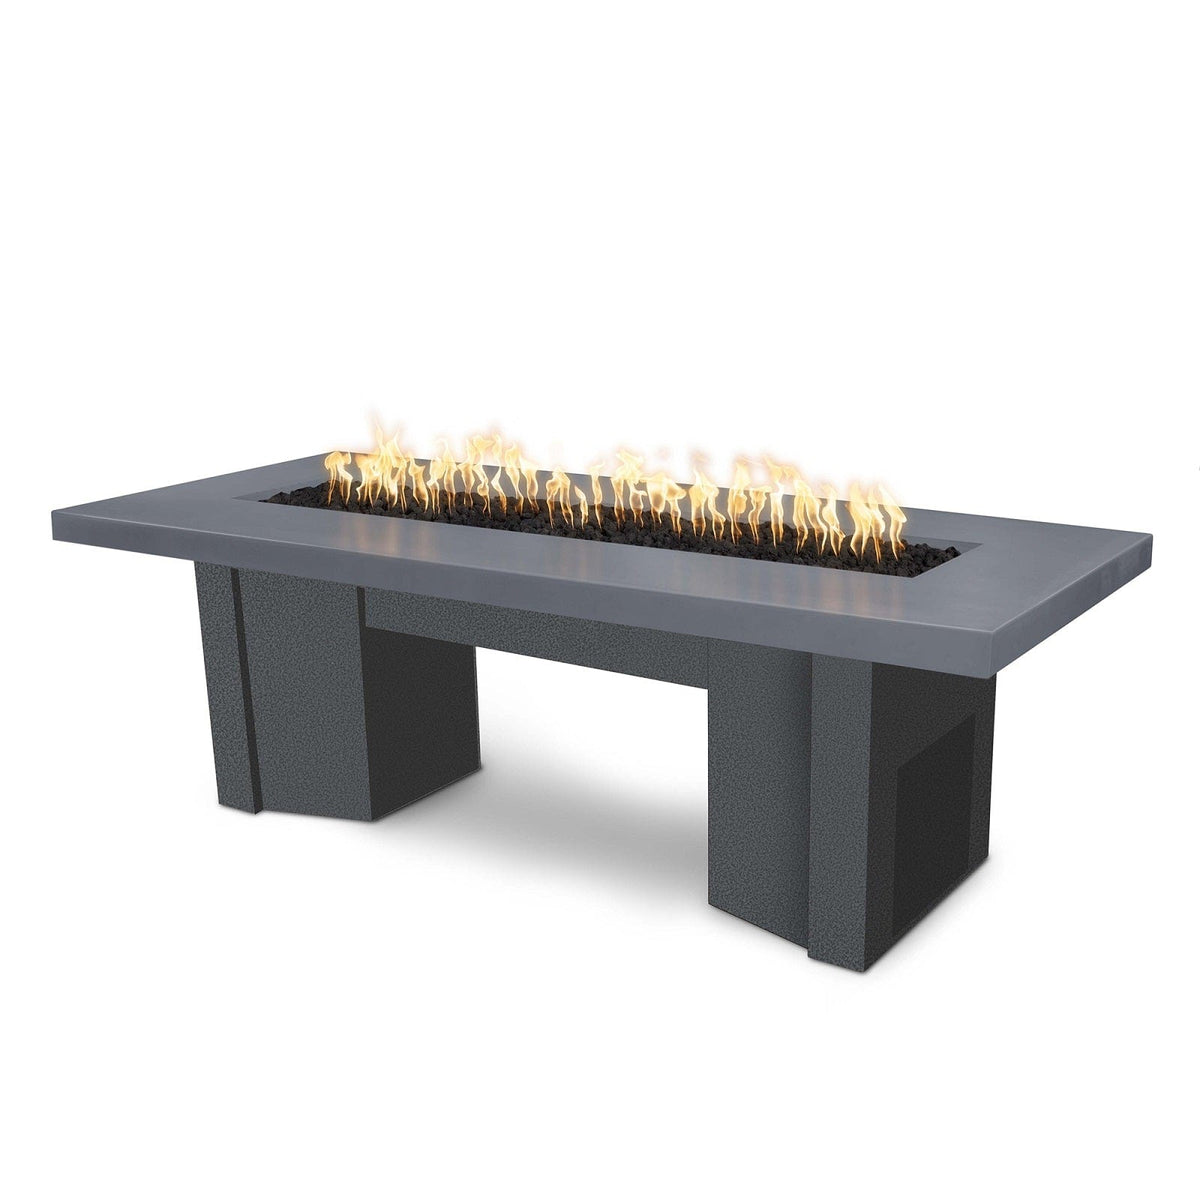 The Outdoor Plus Fire Features Gray (-GRY) / Silver Vein Powder Coated Steel (-SLV) The Outdoor Plus 78&quot; Alameda Fire Table Smooth Concrete in Liquid Propane - Match Lit / OPT-ALMGFRC78-LP